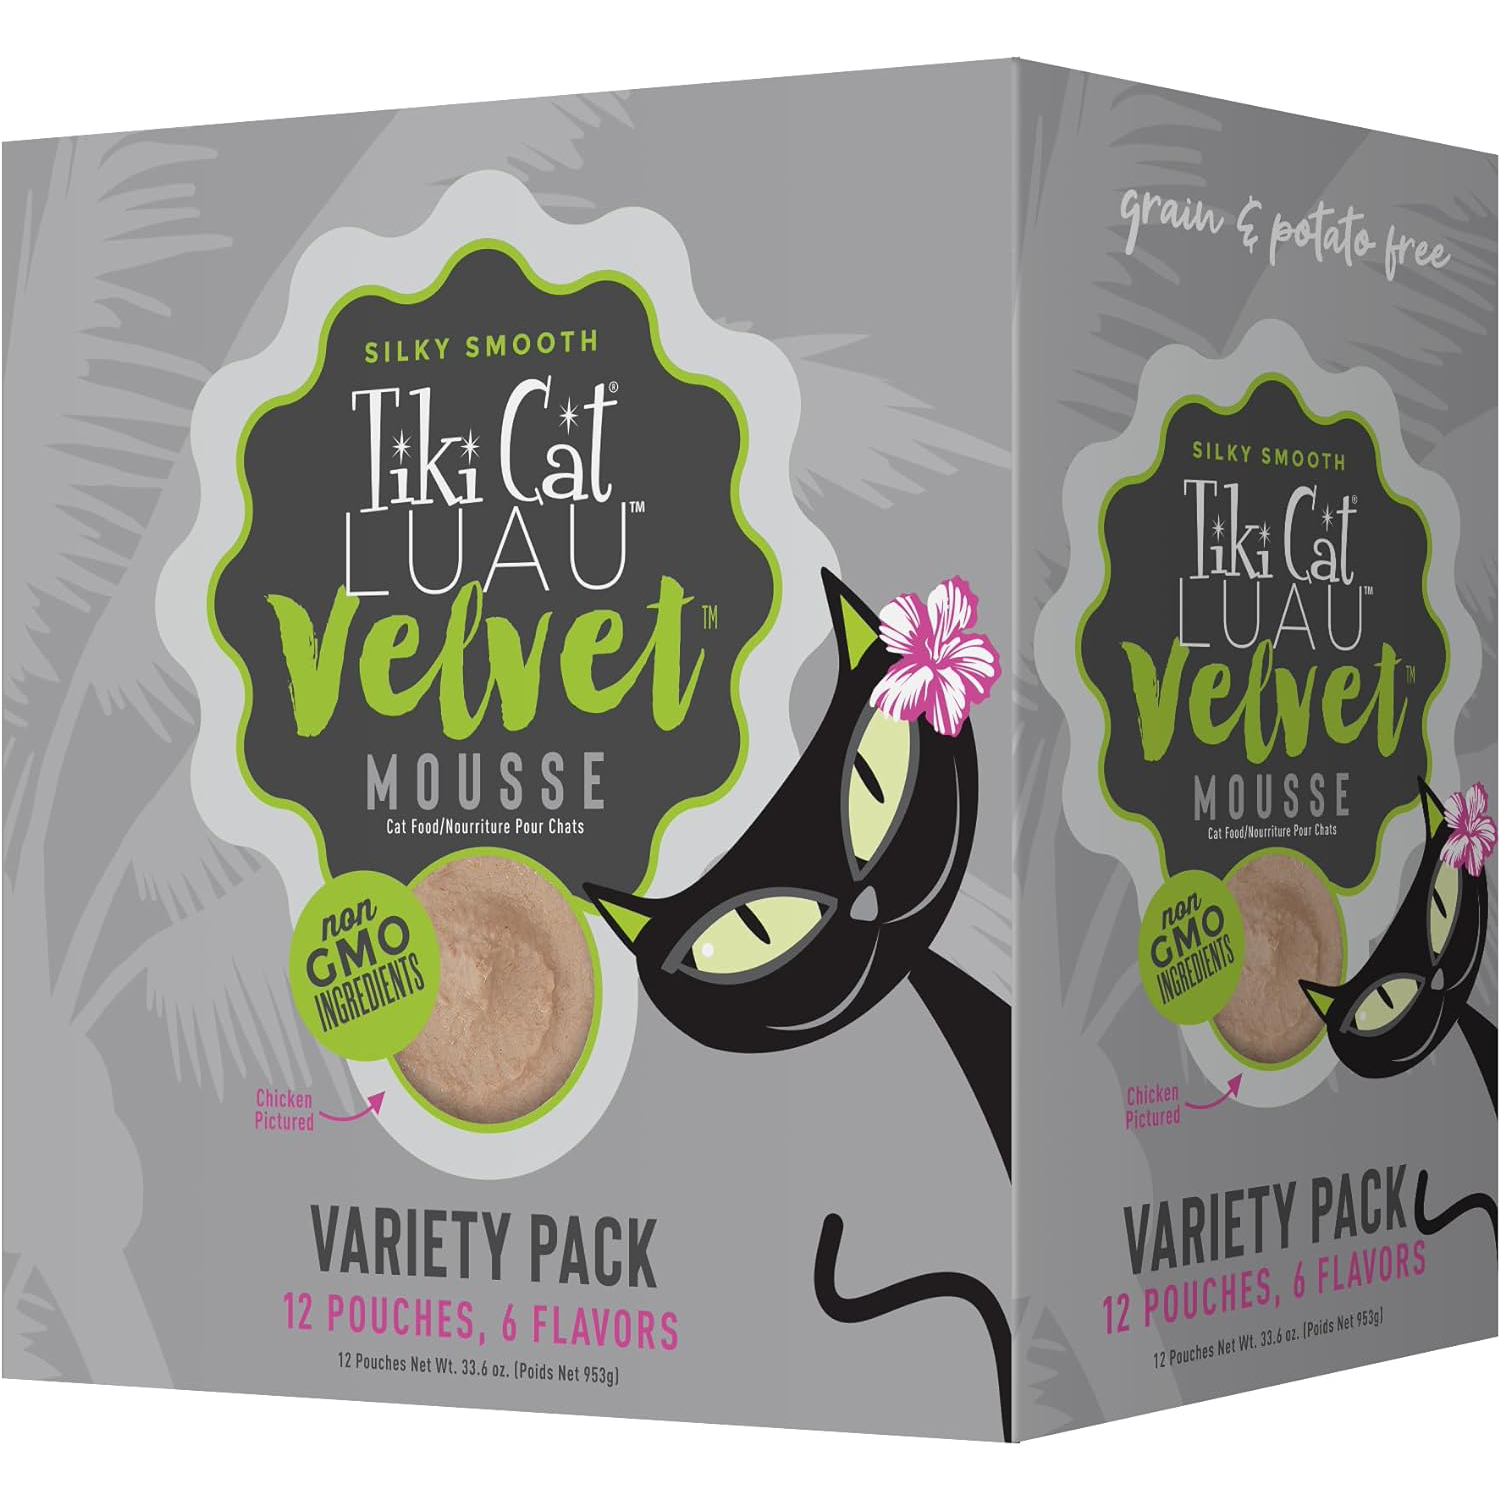 Tiki Cat Velvet Mousse, Protein Blend in Broth Variety Pack, Complete Nutrition for Balanced Diet, Wet Cat Food For All Life Stages, 2.8 oz. Pouch (Pack of 12) new